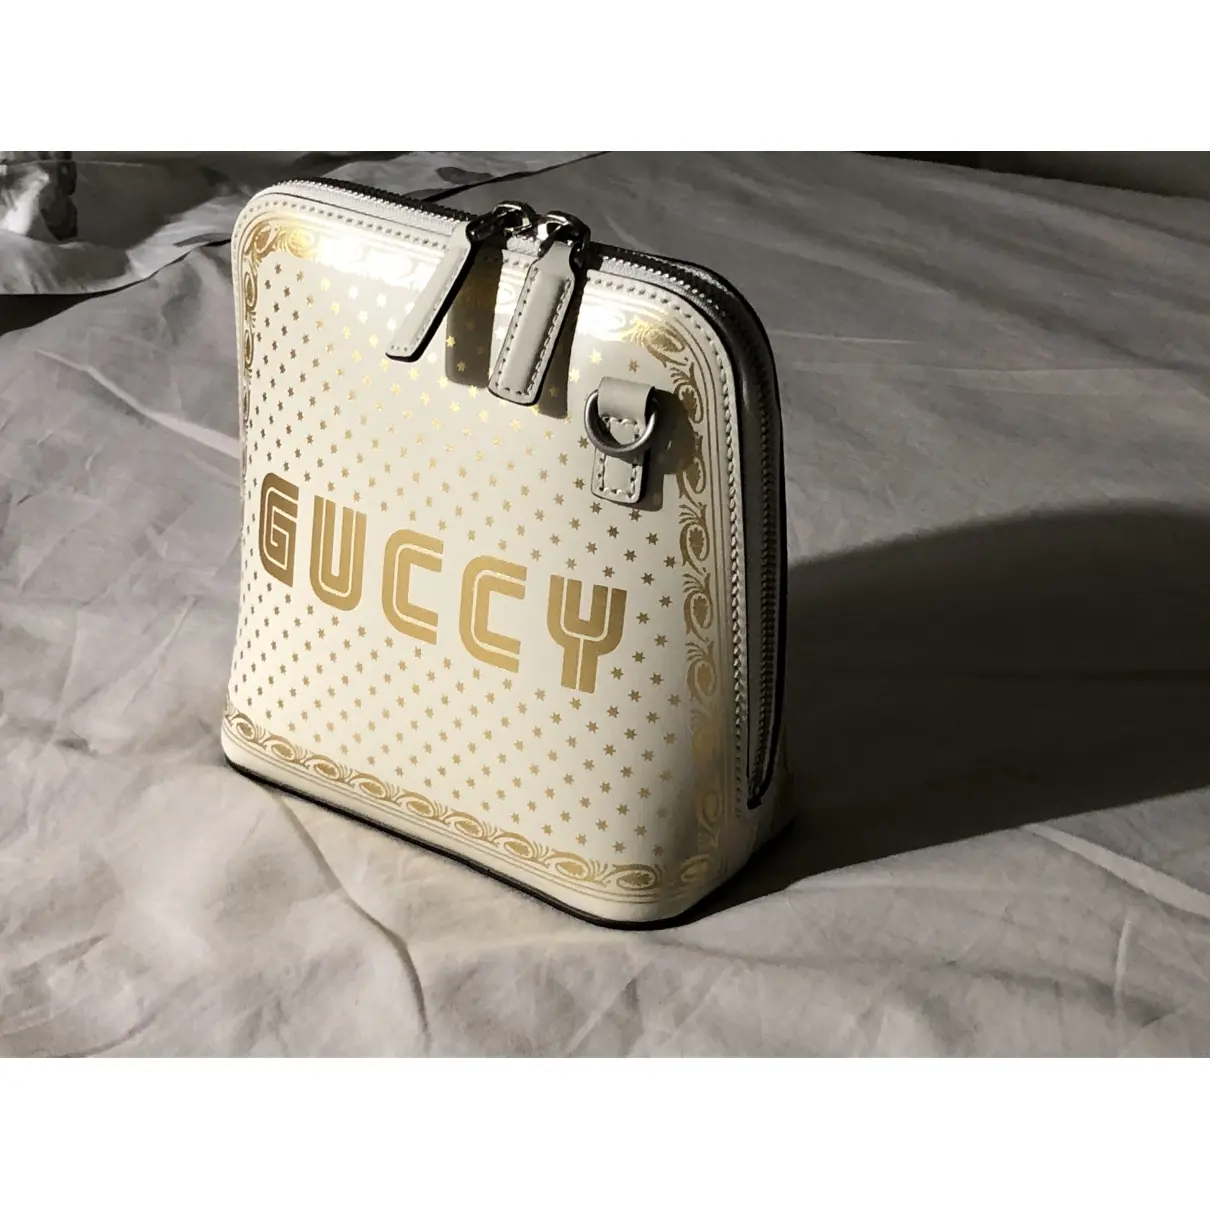 Gucci Guccy minibag leather handbag for sale